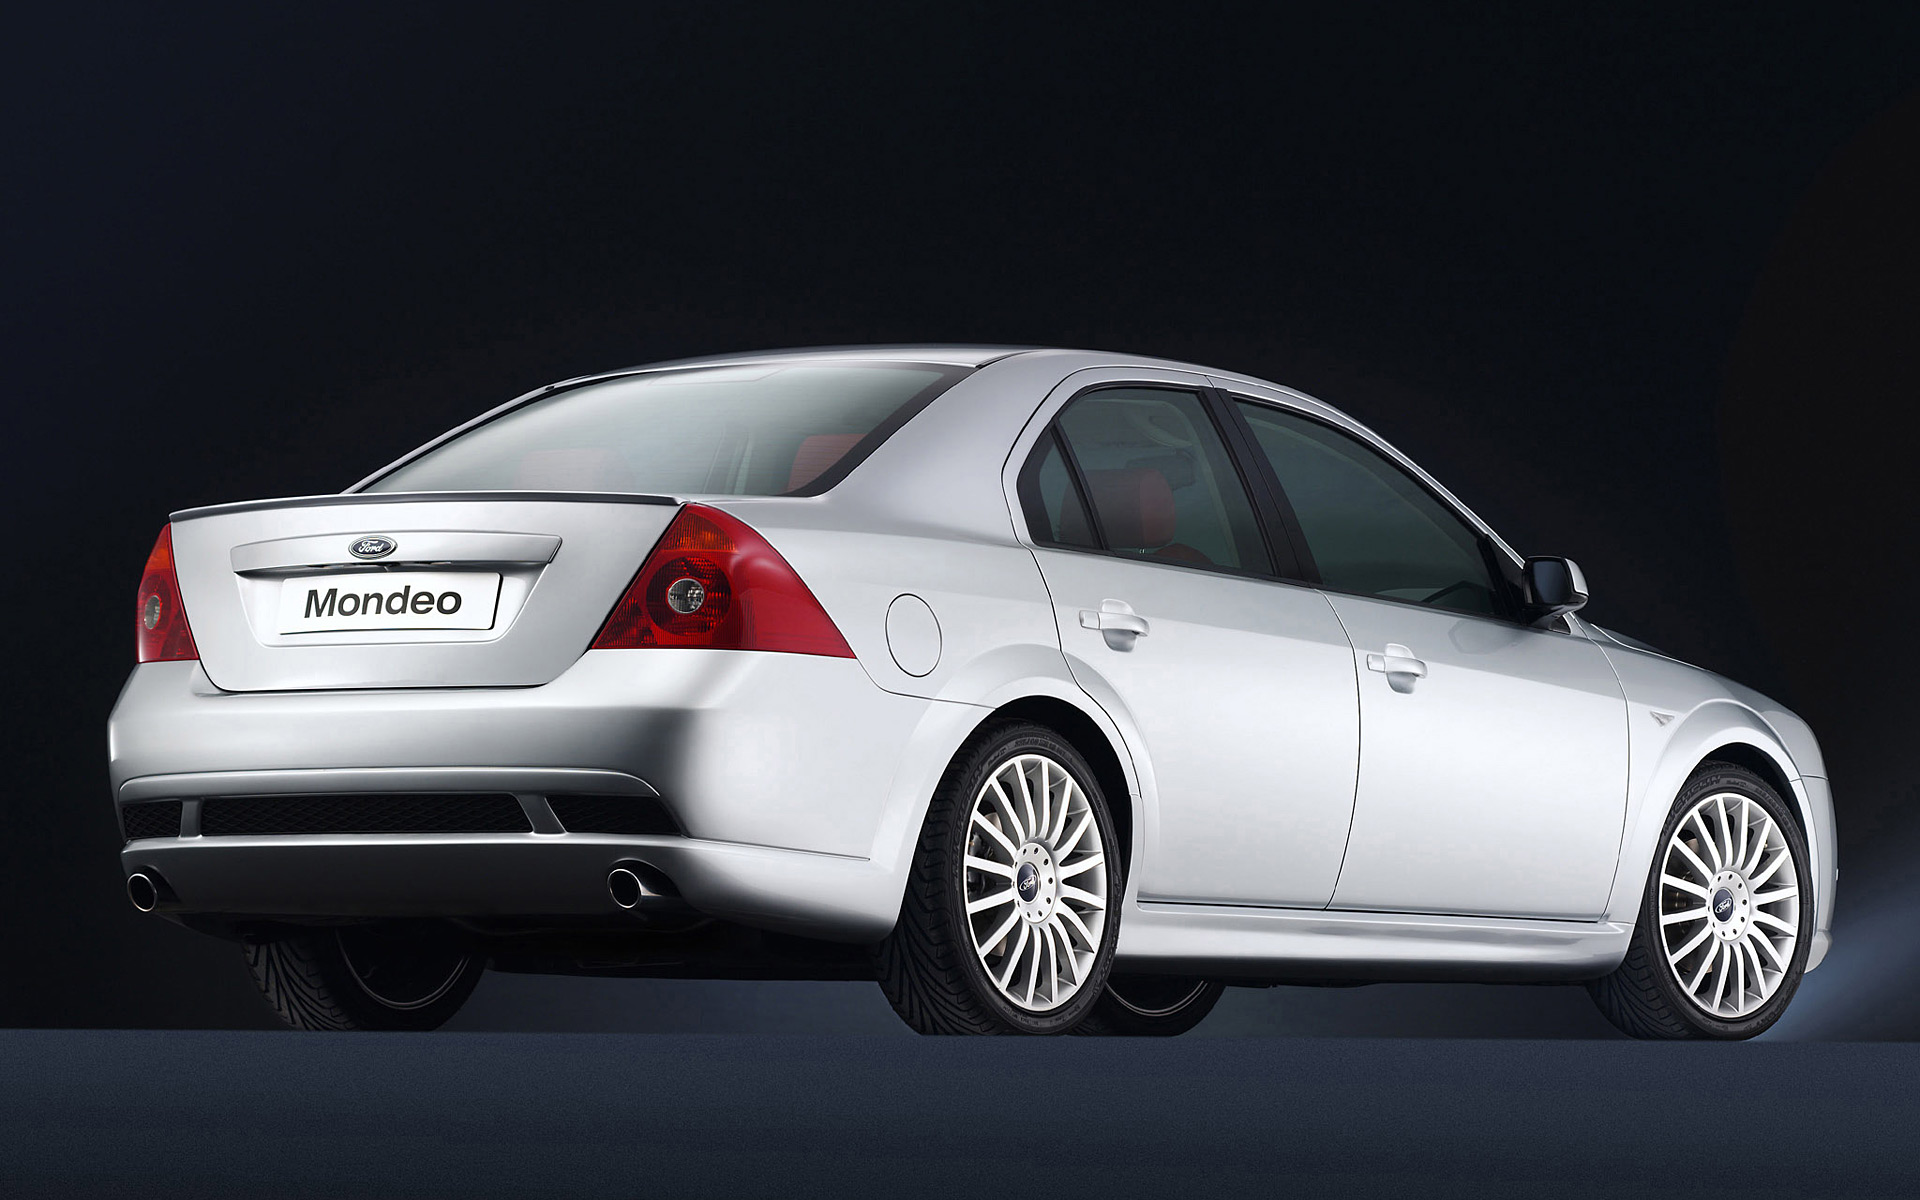  2002 Ford Mondeo ST220 Wallpaper.